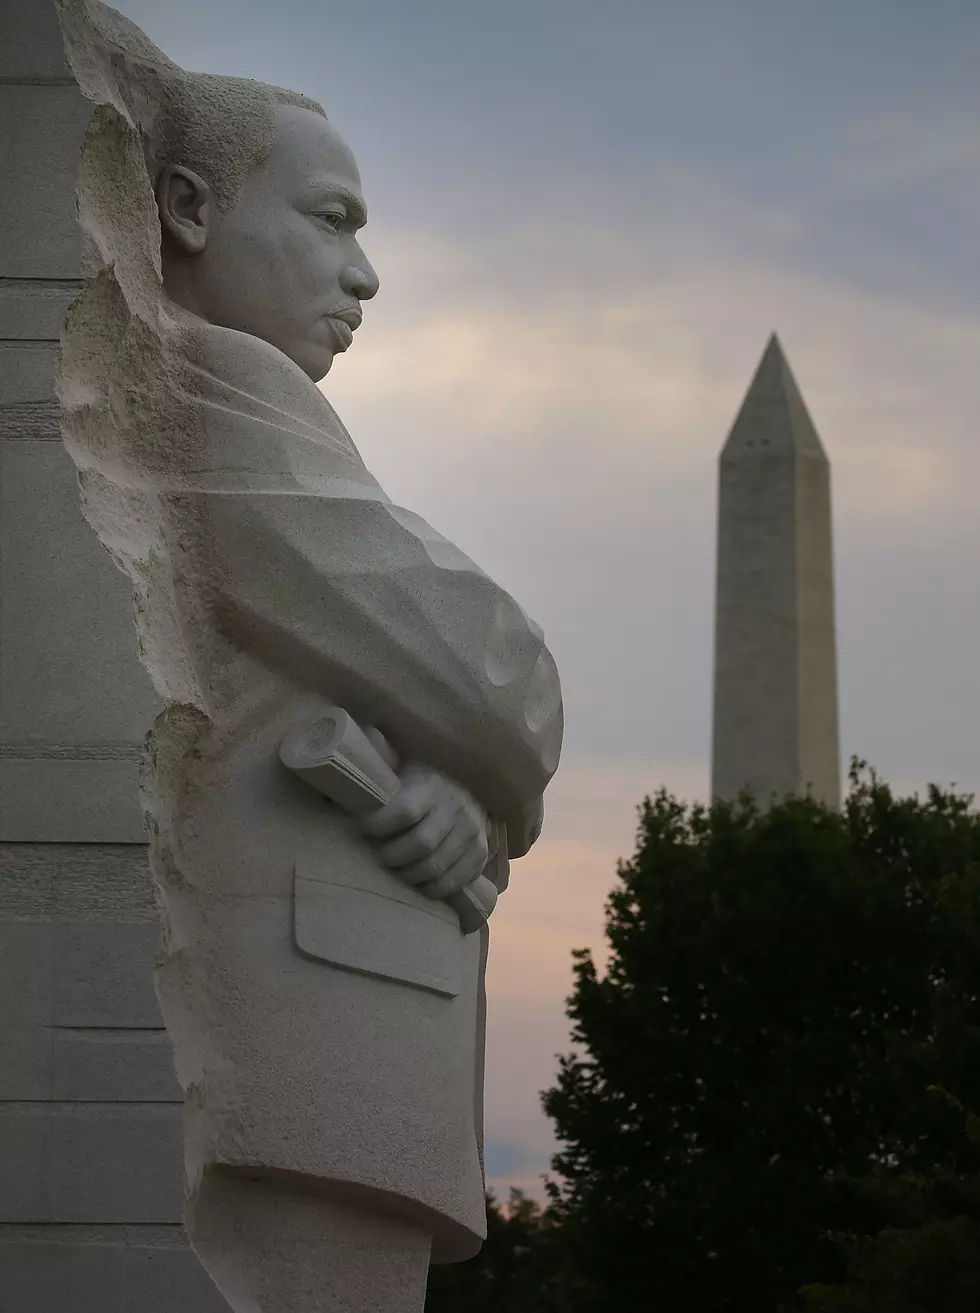 Dr. King’s Kids And Grandchild Read, “I Have A Dream” Address